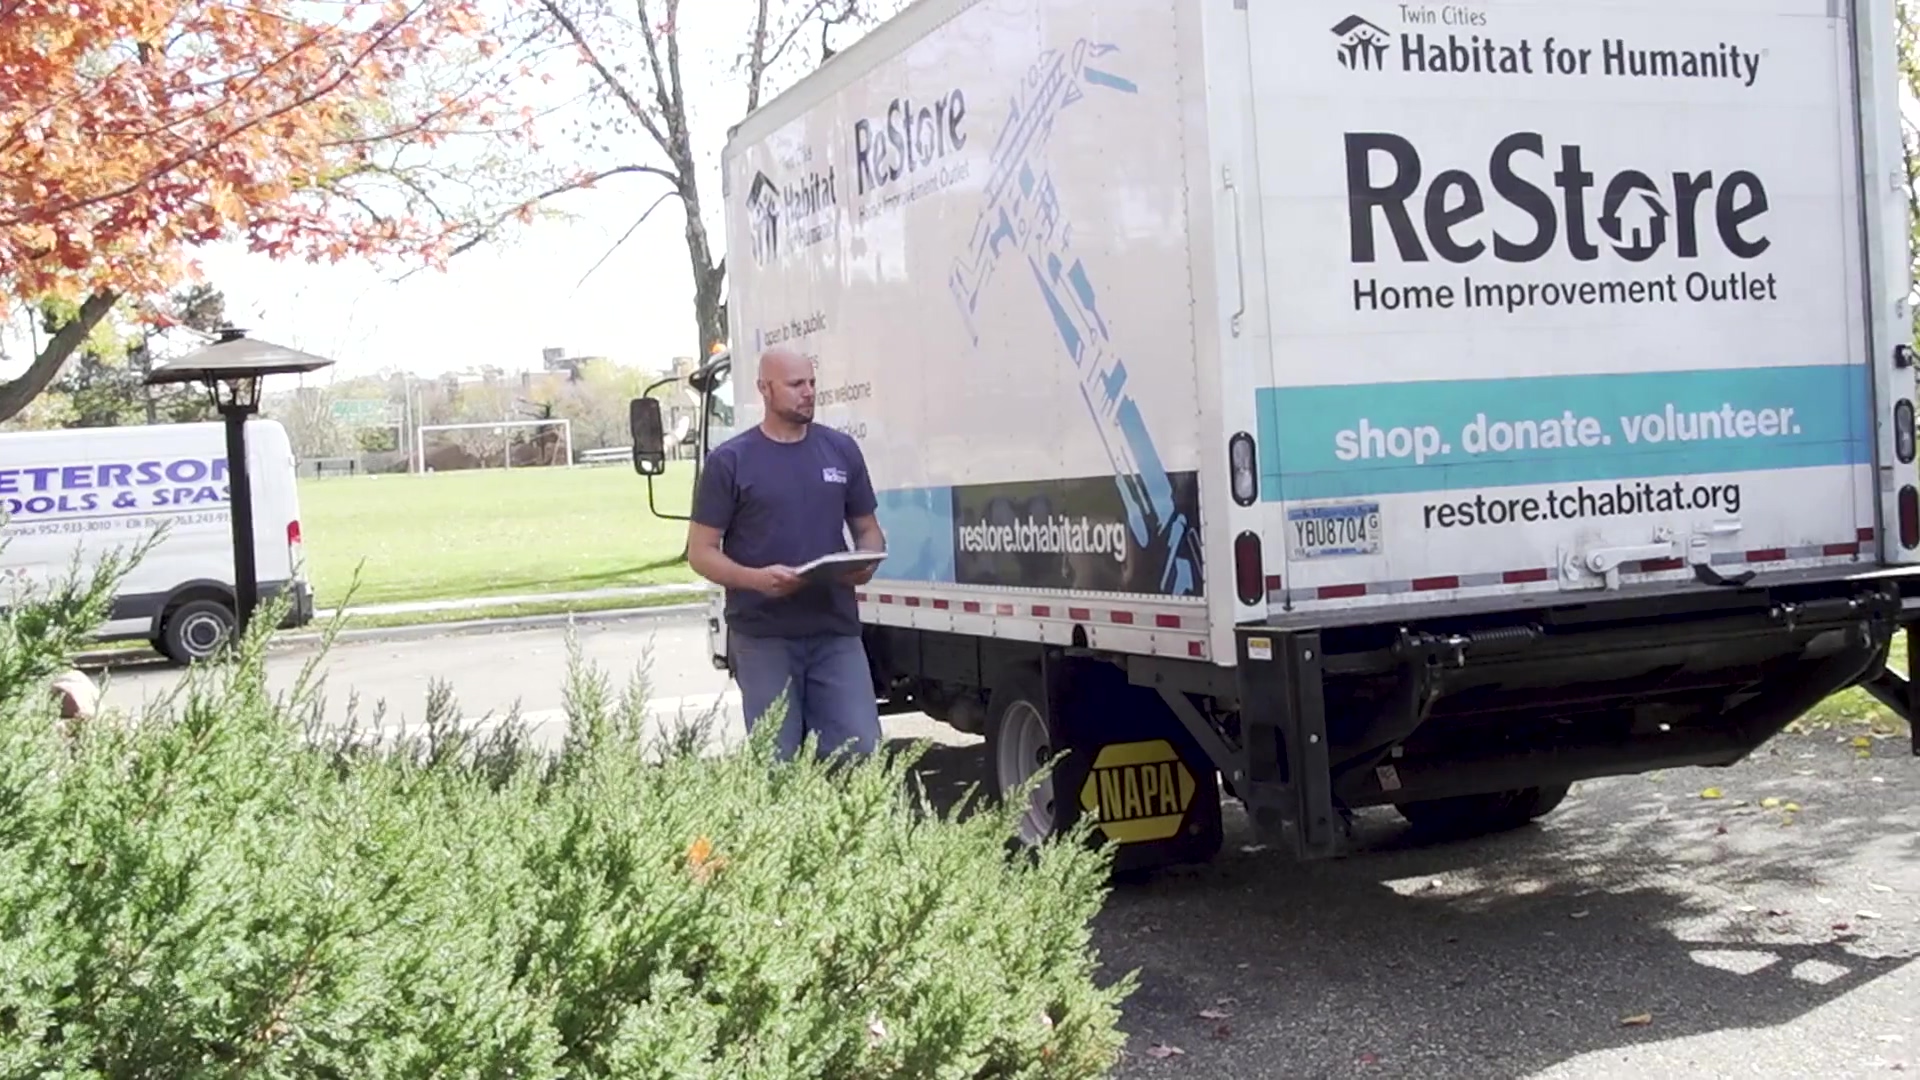 A ReStore employee and truck picking up donations.